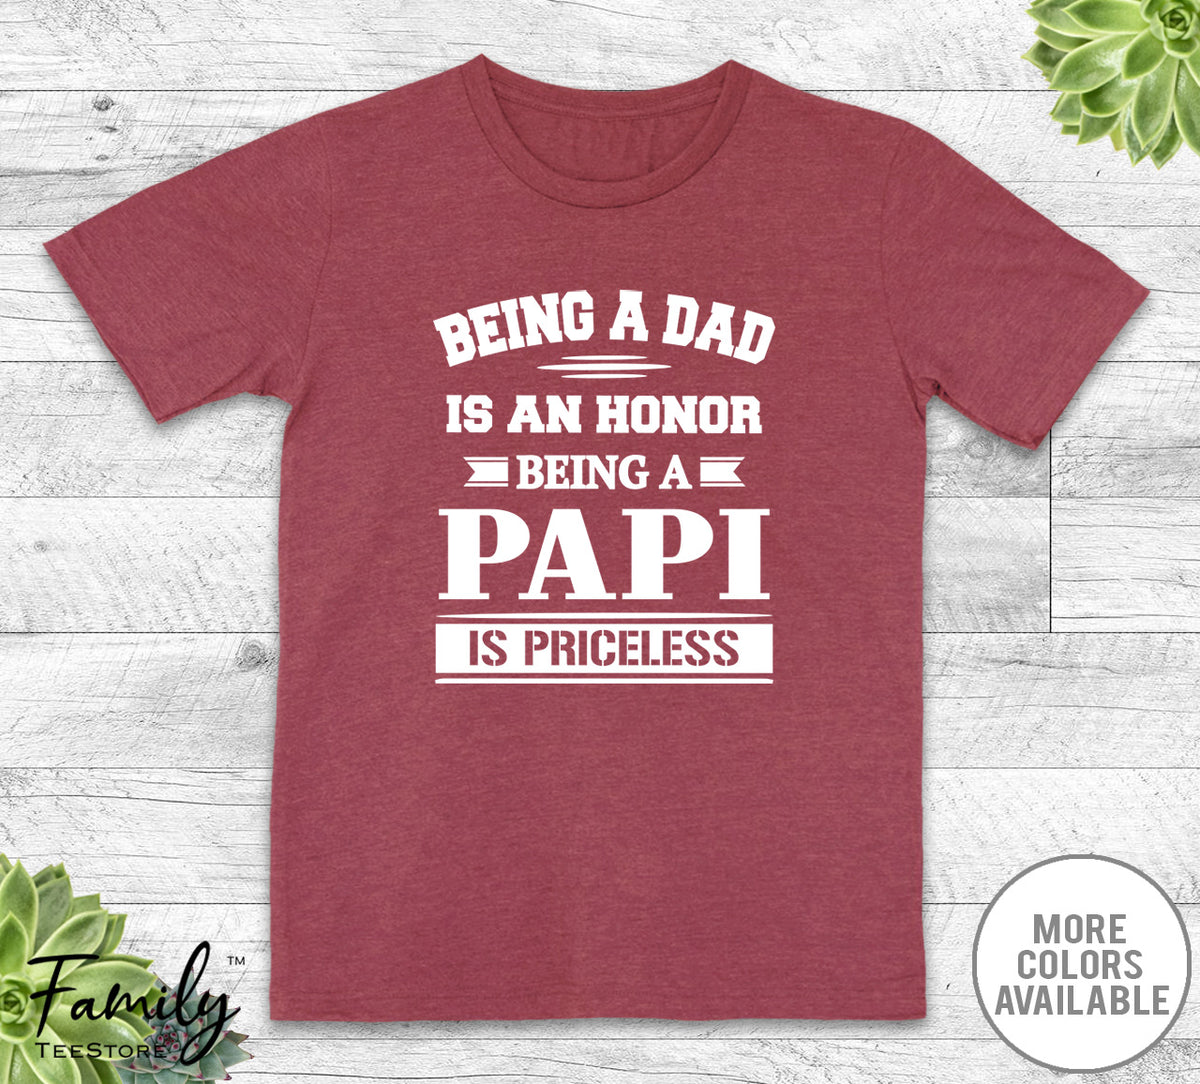 Being A Dad Is An Honor Being A Papi Is Priceless - Unisex T-shirt - Papi Shirt - Papi Gift - familyteeprints